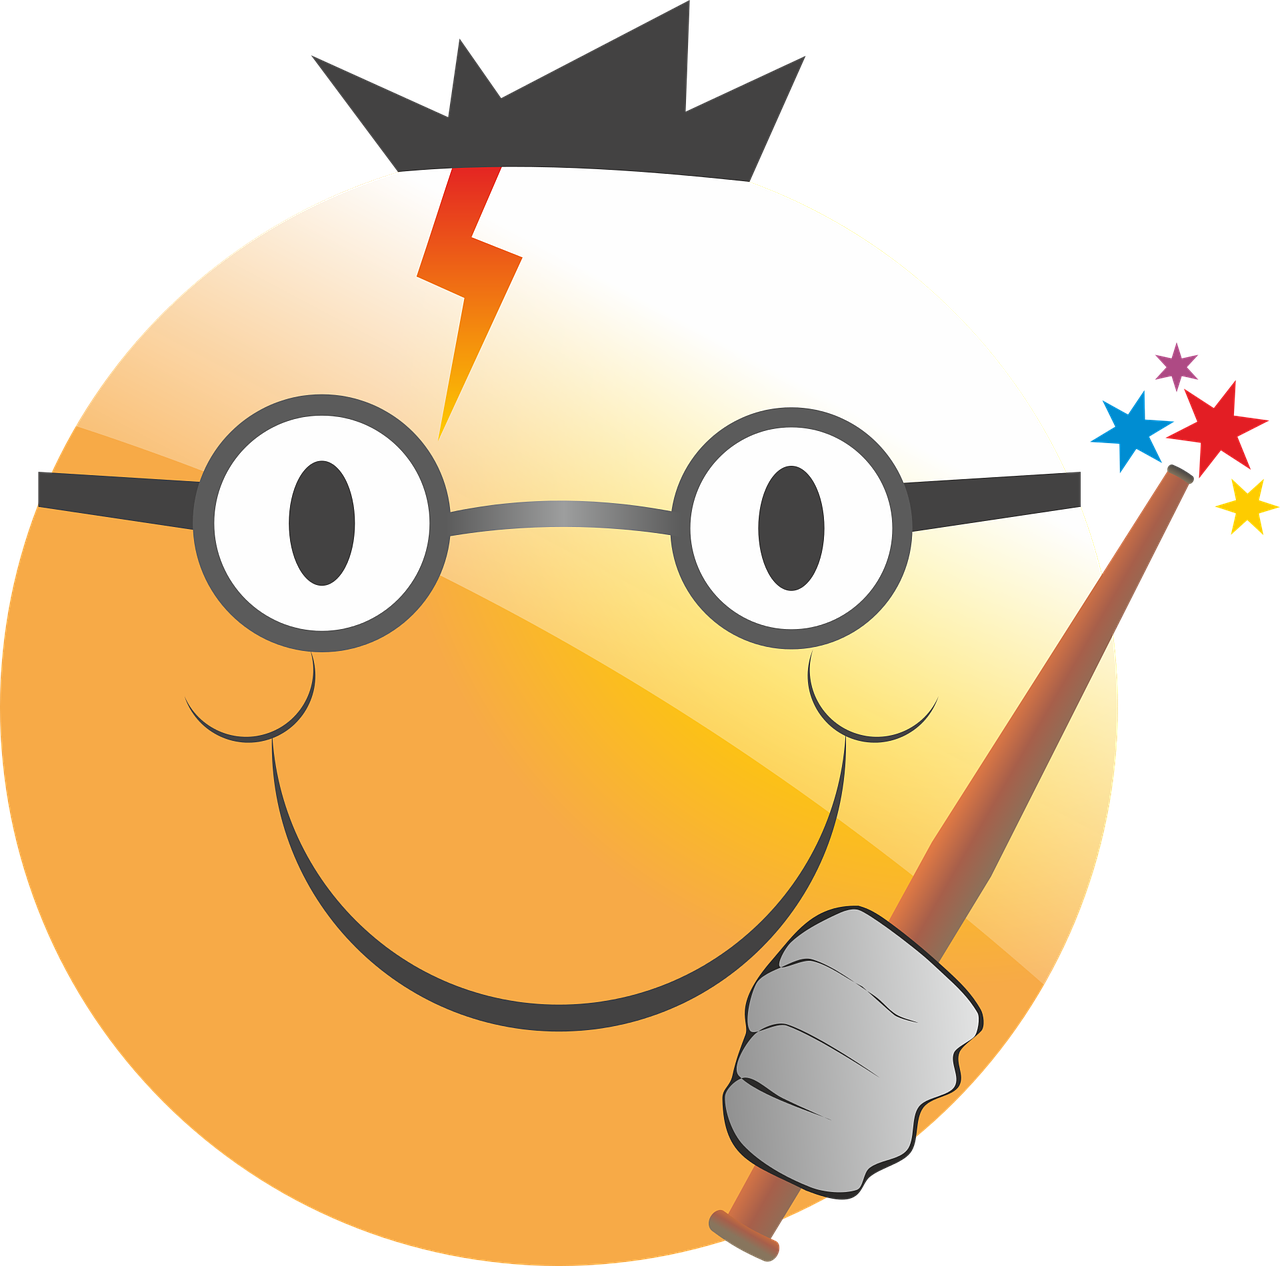 Smiley face with glasses, lightning scar, and wand.